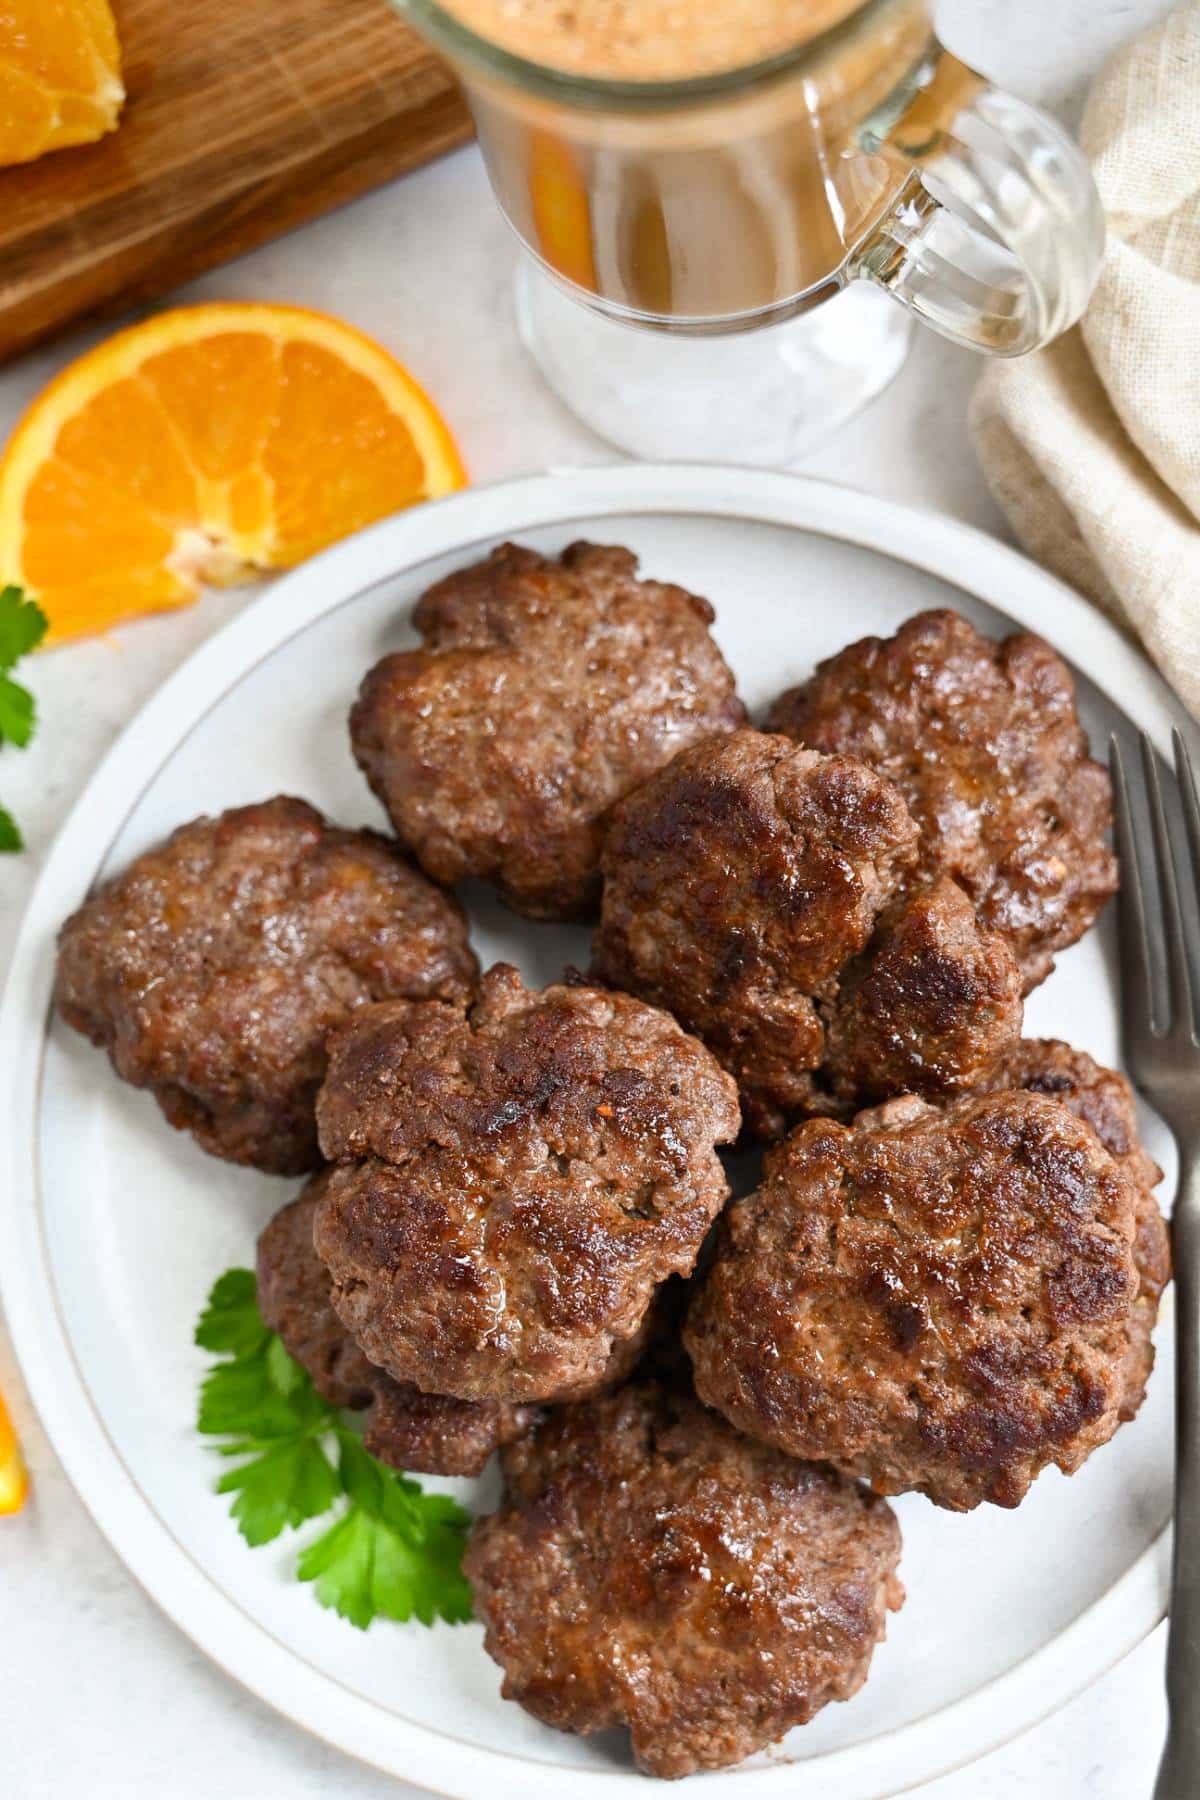 a plate with beef sausage patties and a sprig of parsley with a cup of coffee and orange slices around it